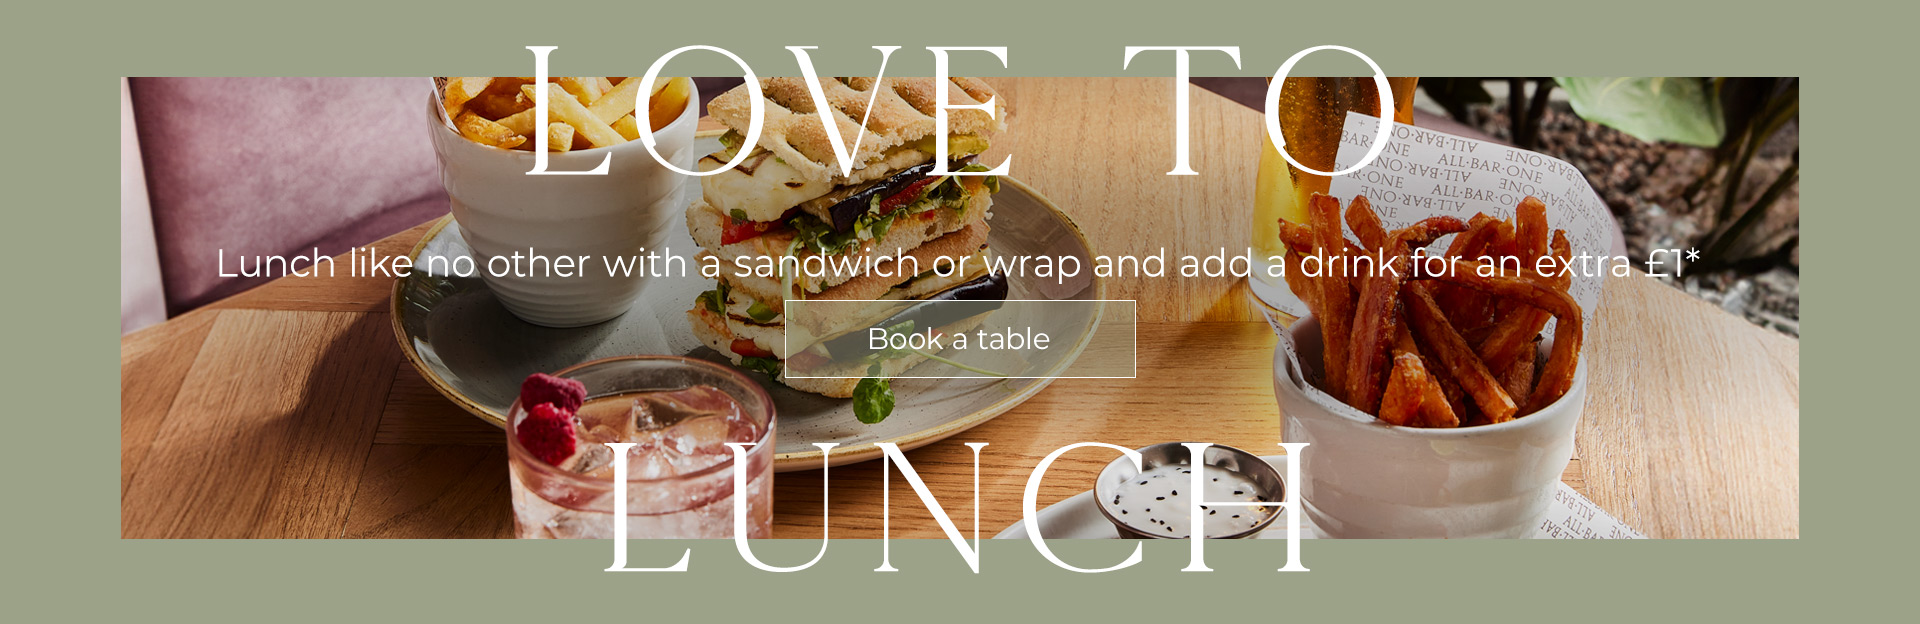 Lunch Offer at All Bar One Tower of London